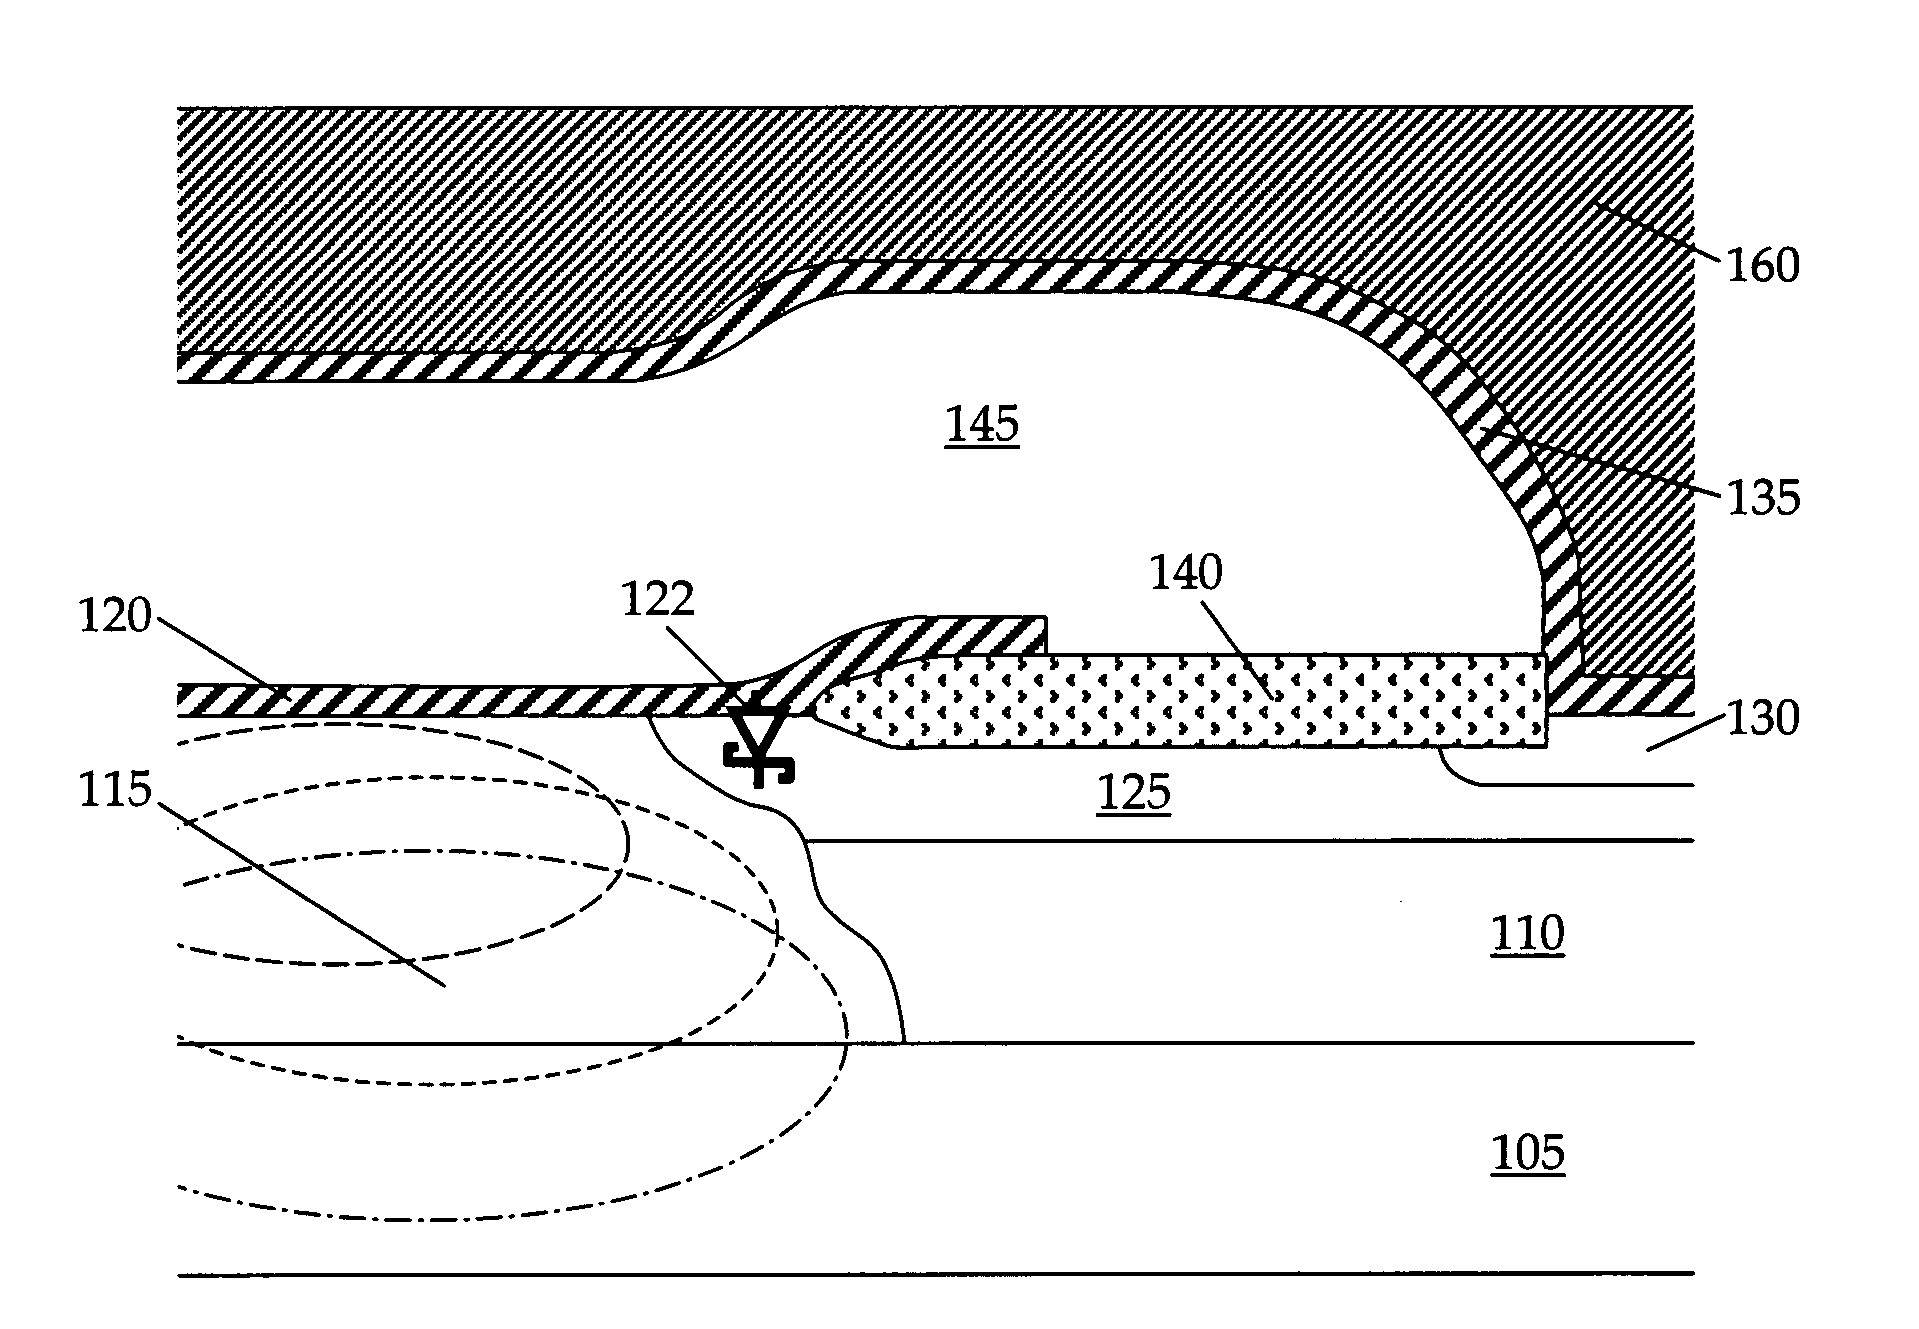 Bottom anode Schottky diode structure and method